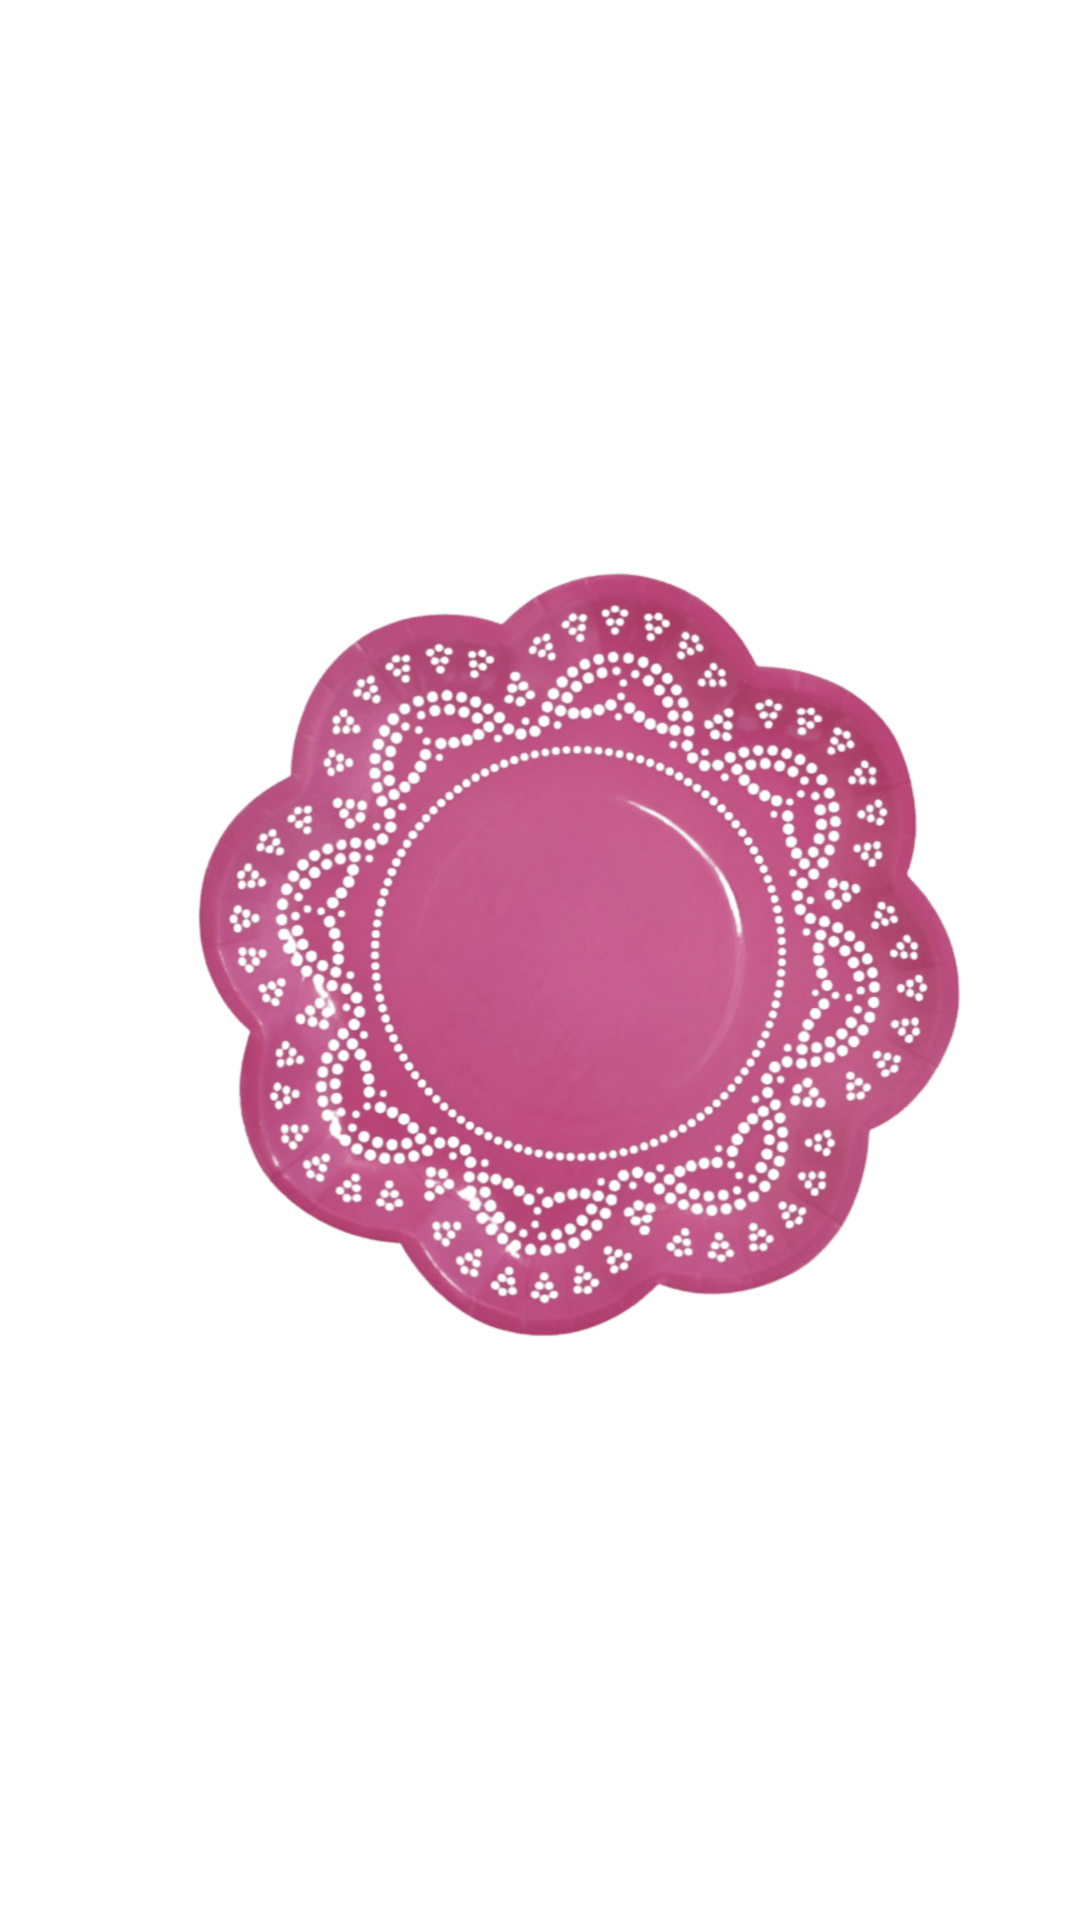 Stunning hot pink paper dessert plates with white lace print around border